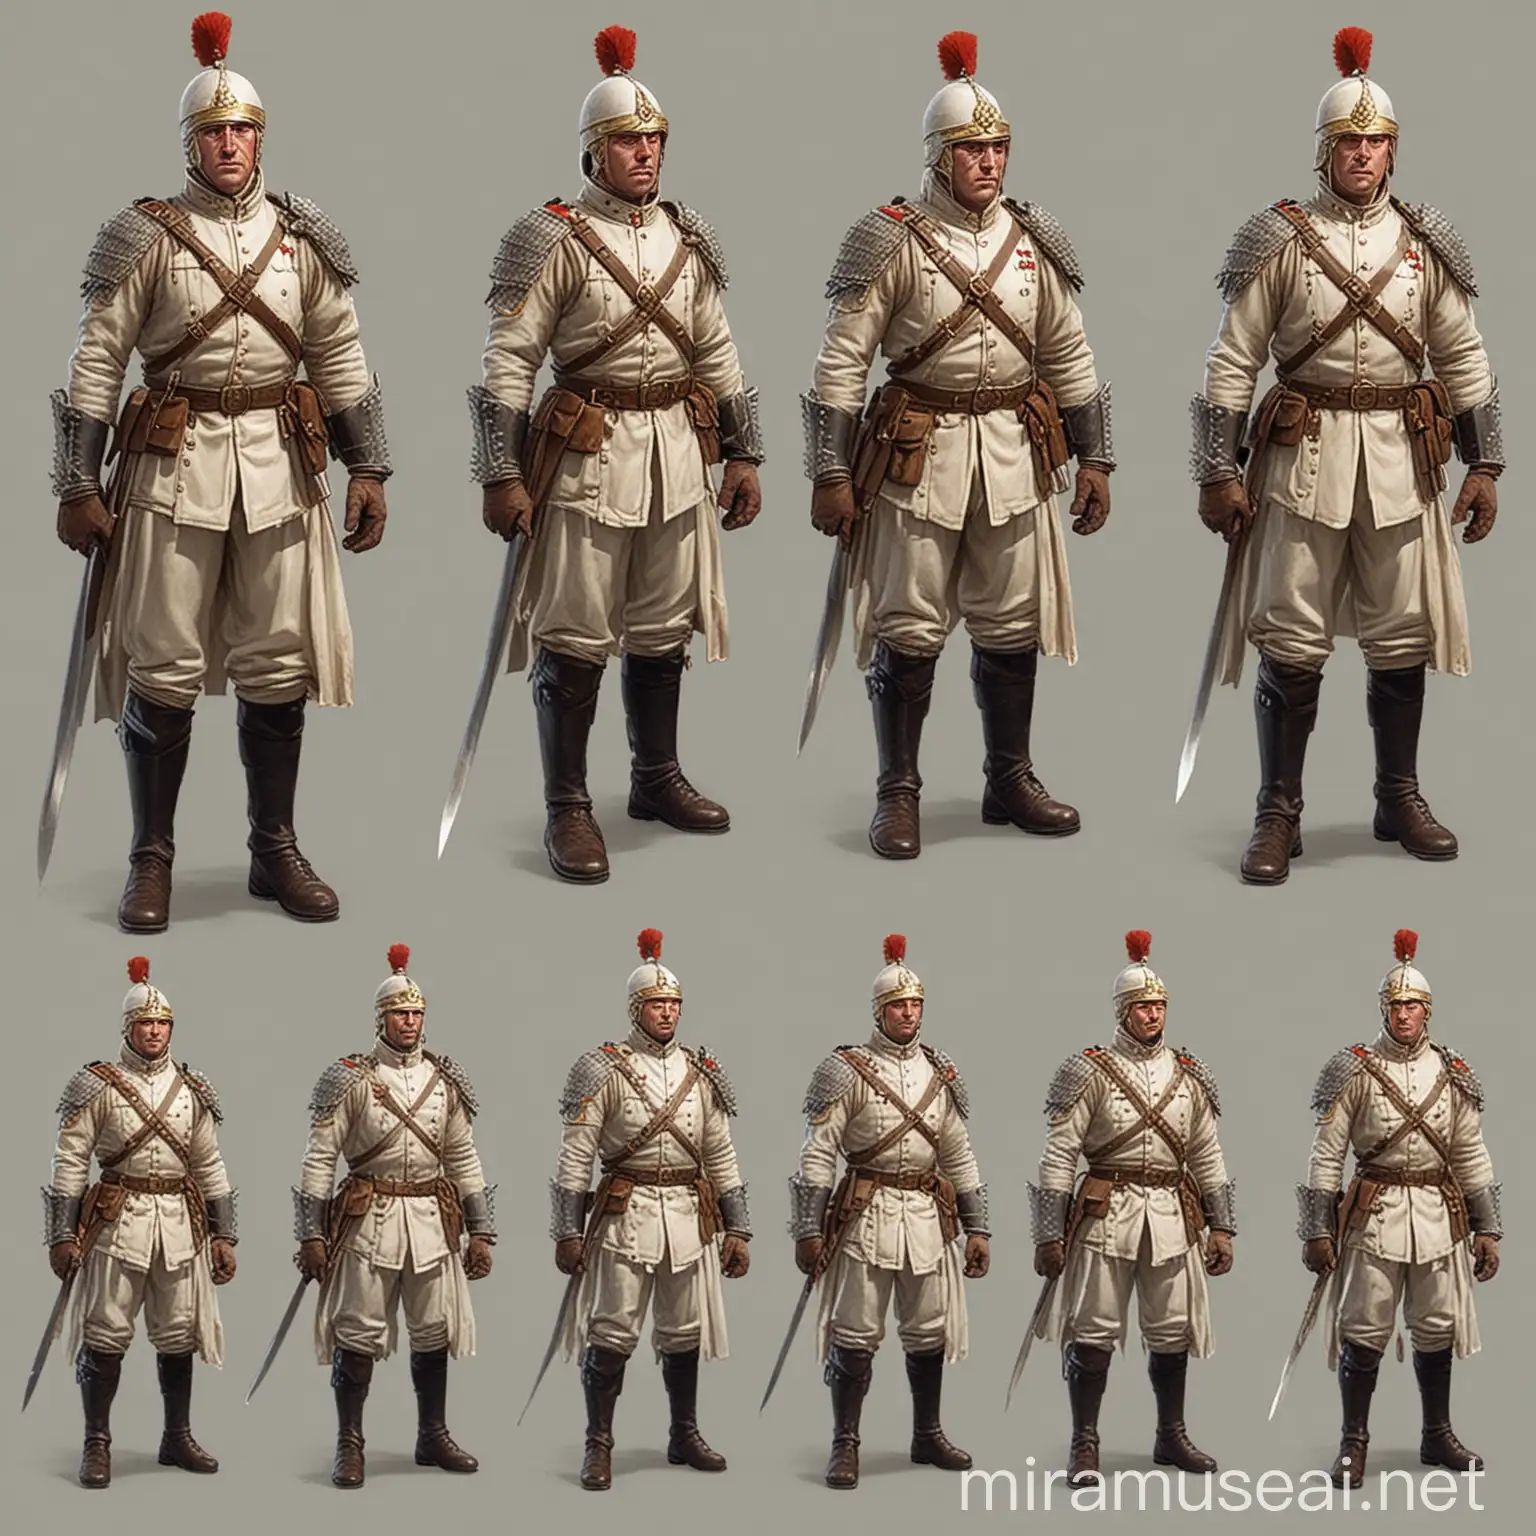 2d game character of british army like the educated army with swords and archers and spear men and horse riders but seperately  and change the dressing of the characters like the white dressed england army 

